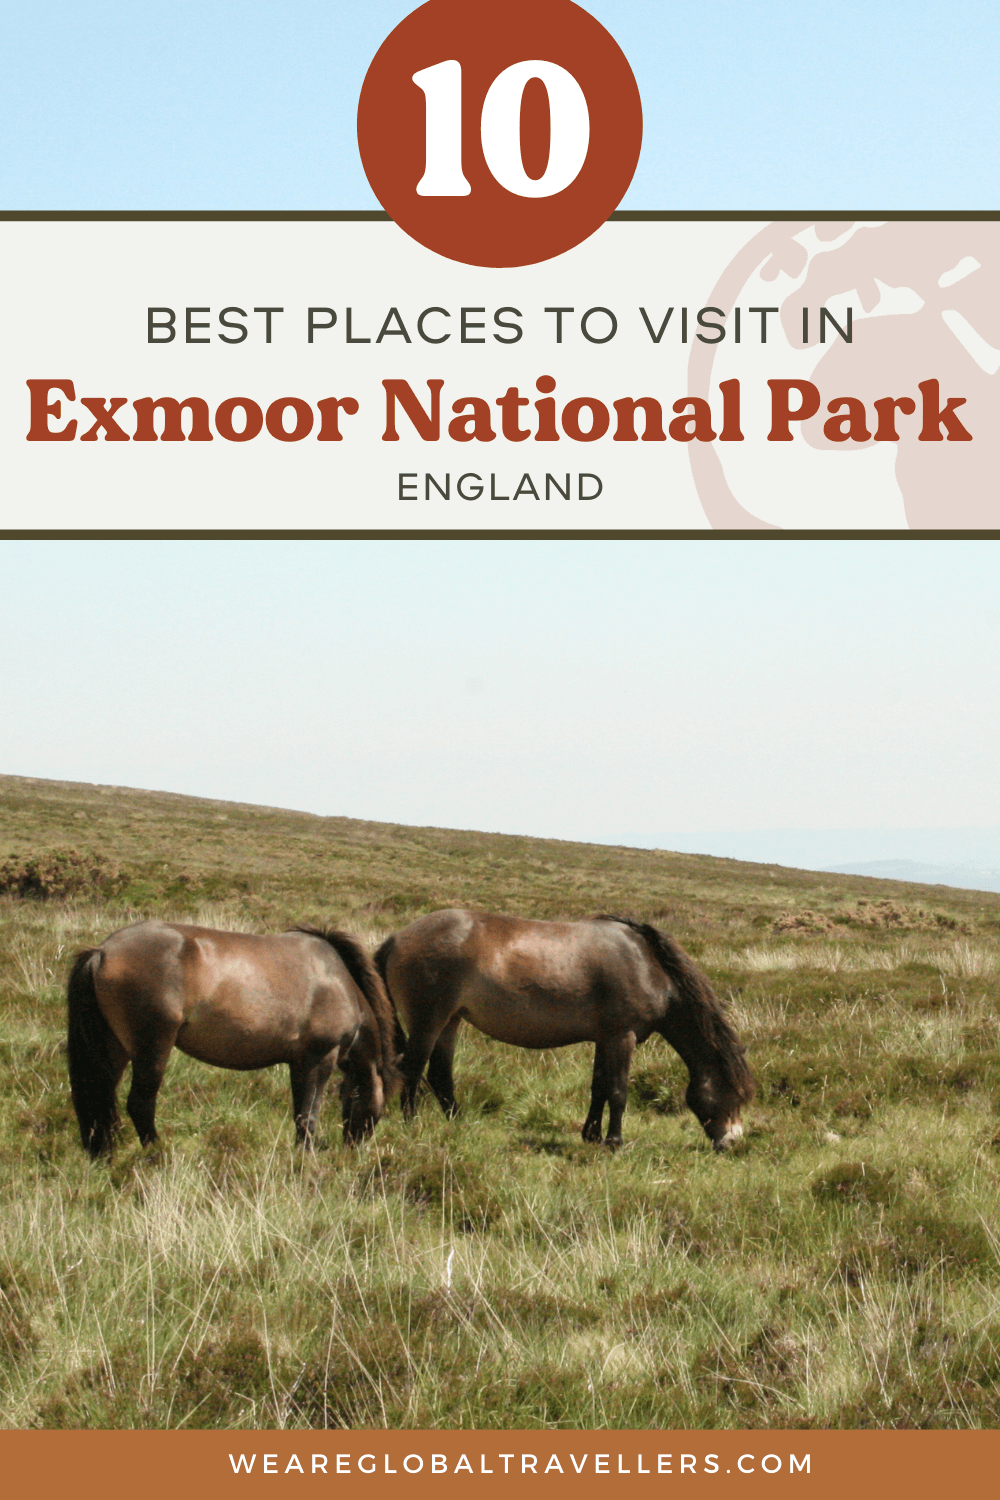 A complete guide to Exmoor National Park, England